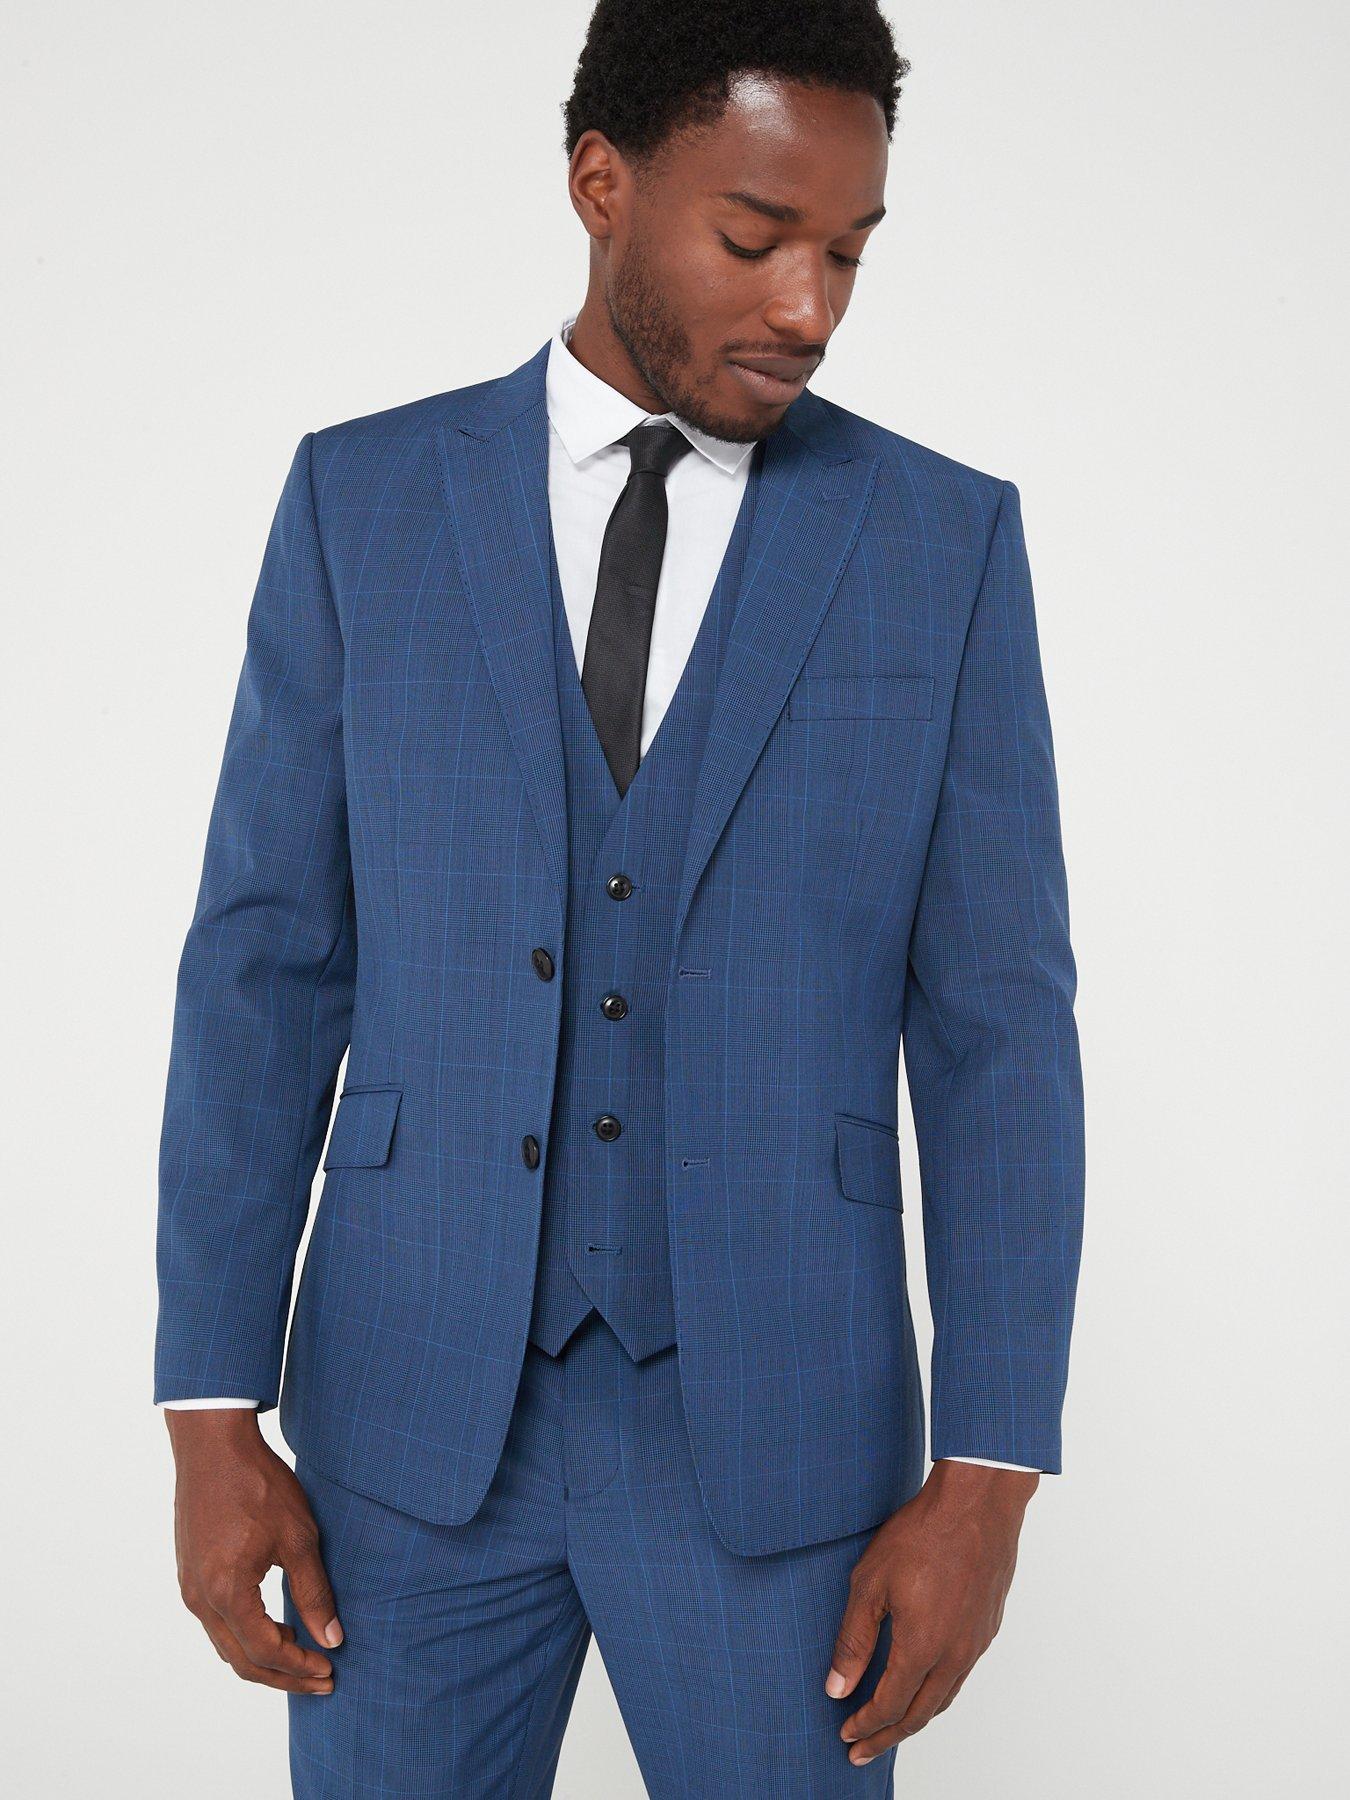 Peter Werth X Very Slim Fit Check Suit Jacket - Navy